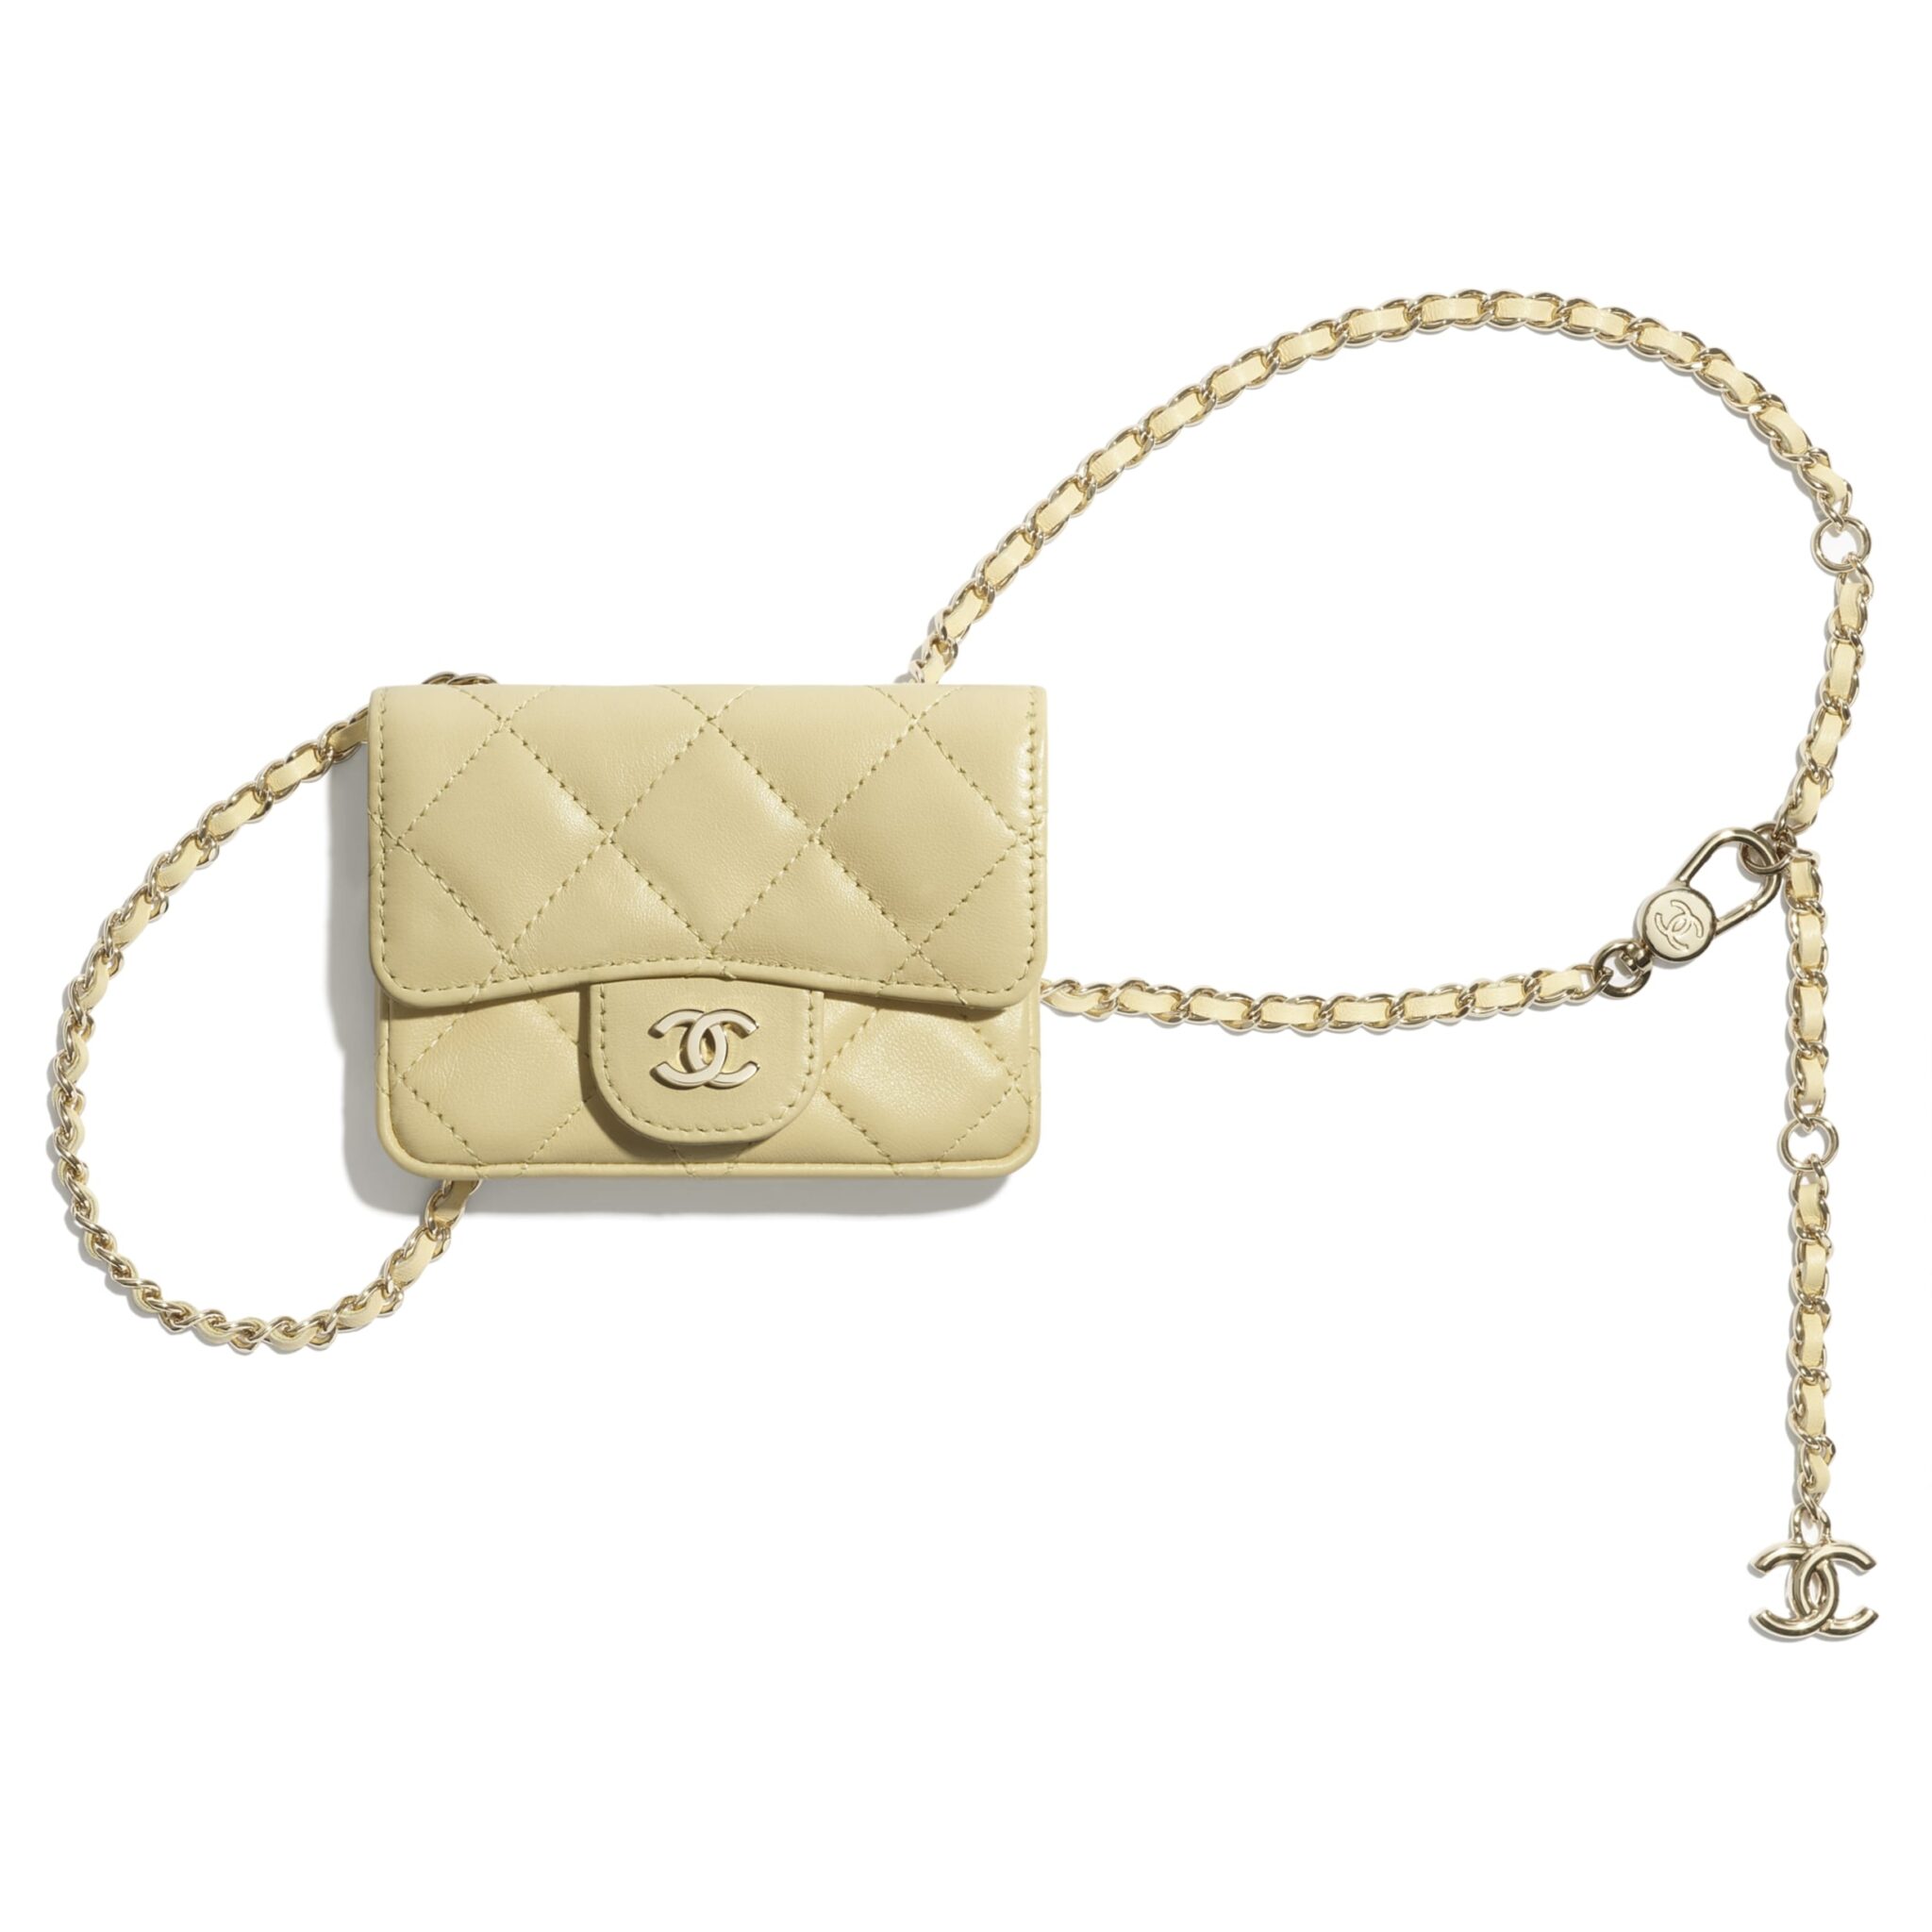 chanel small leather goods bag